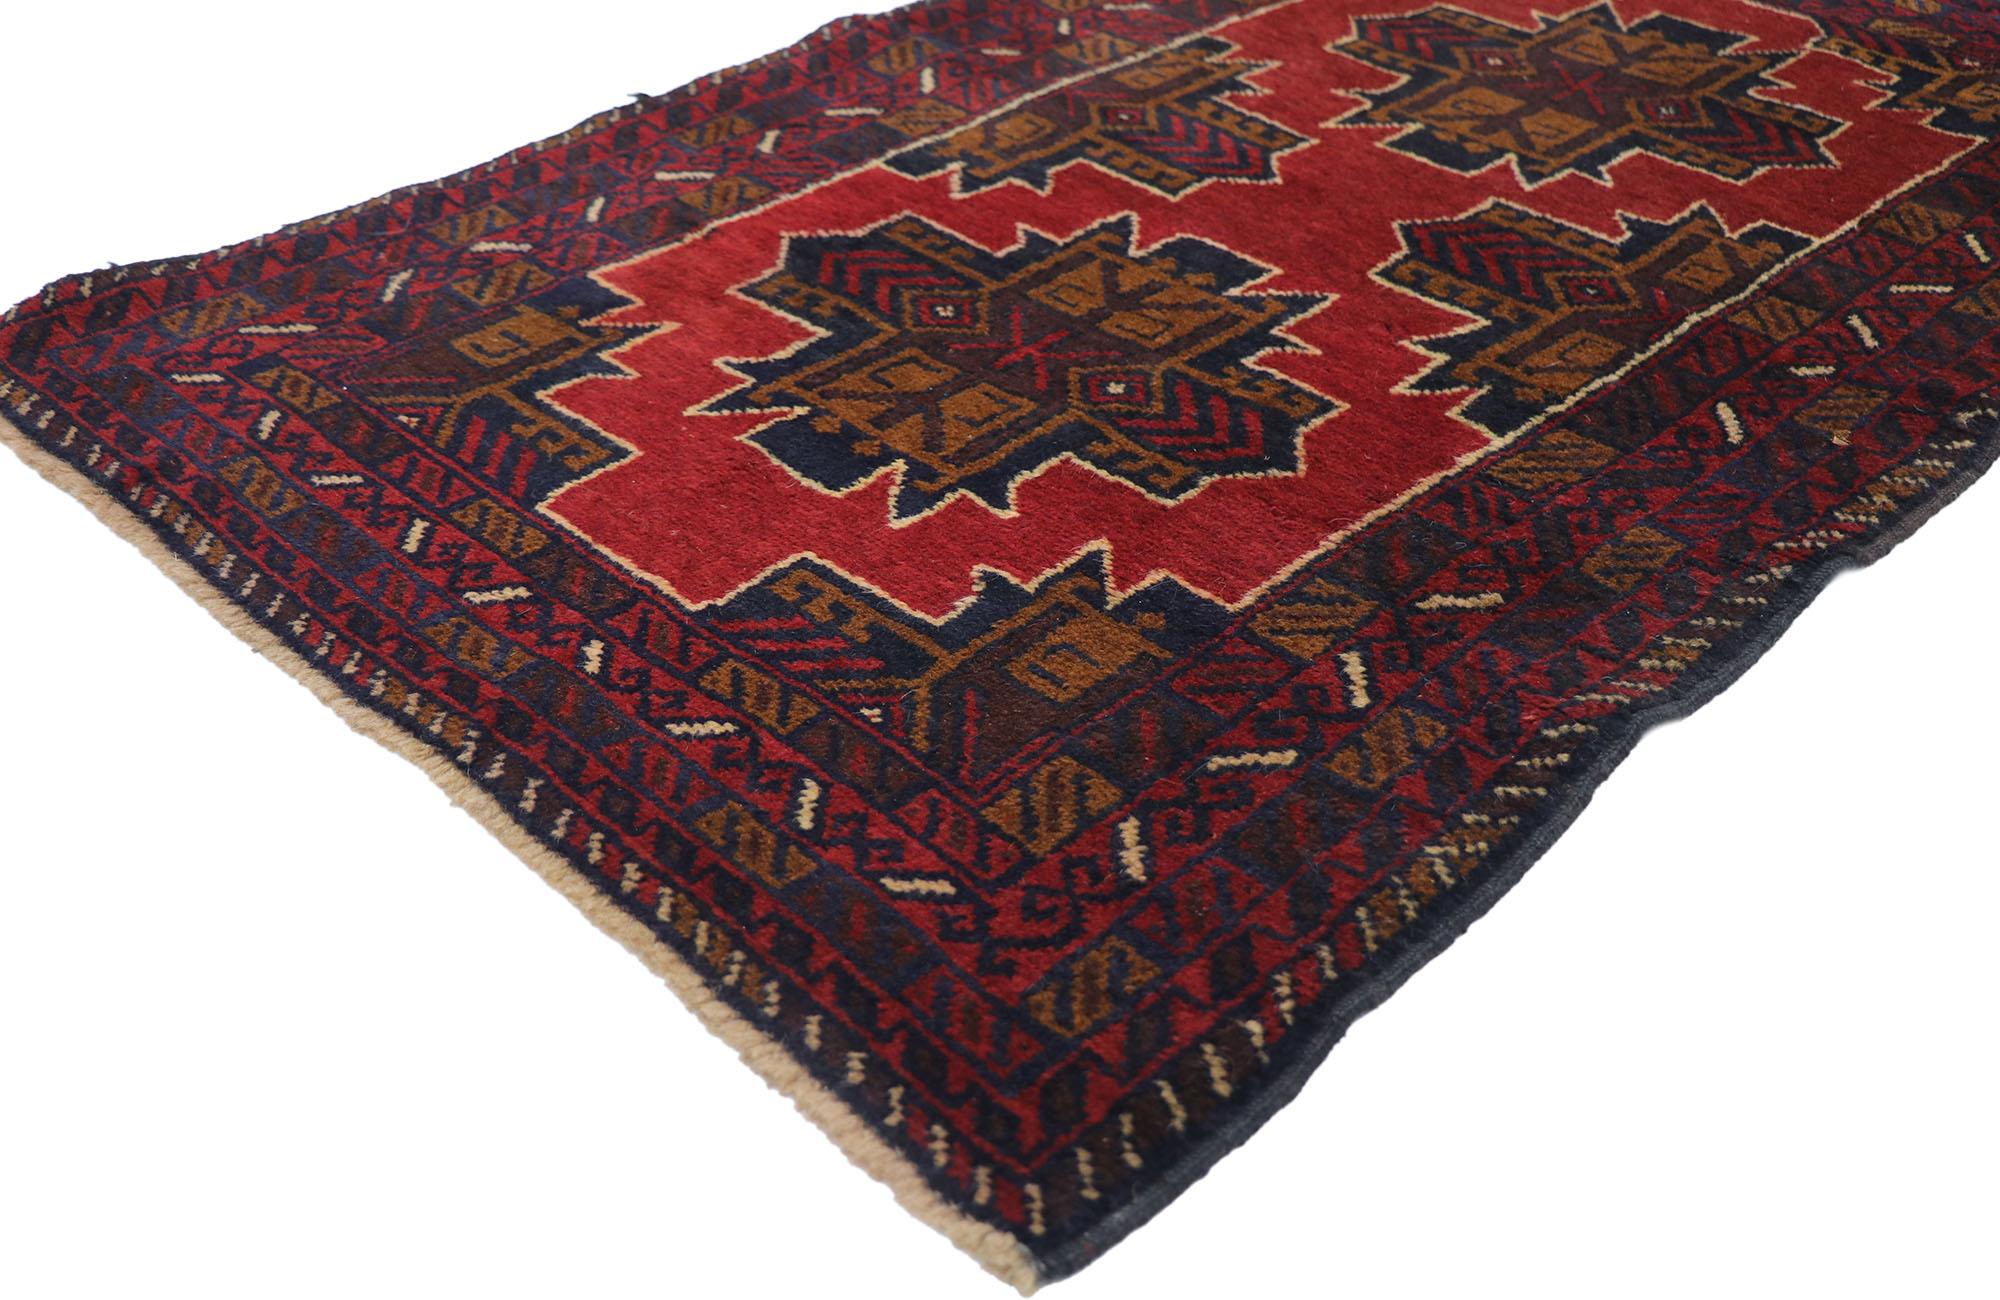 78089 Vintage Persian Baluch rug with Mid-Century Modern style 02'10 x 04'05. Warm and inviting with a bold expressive design and tribal style, this hand-knotted wool vintage Persian Baluch rug is a captivating vision of woven beauty. The abrashed